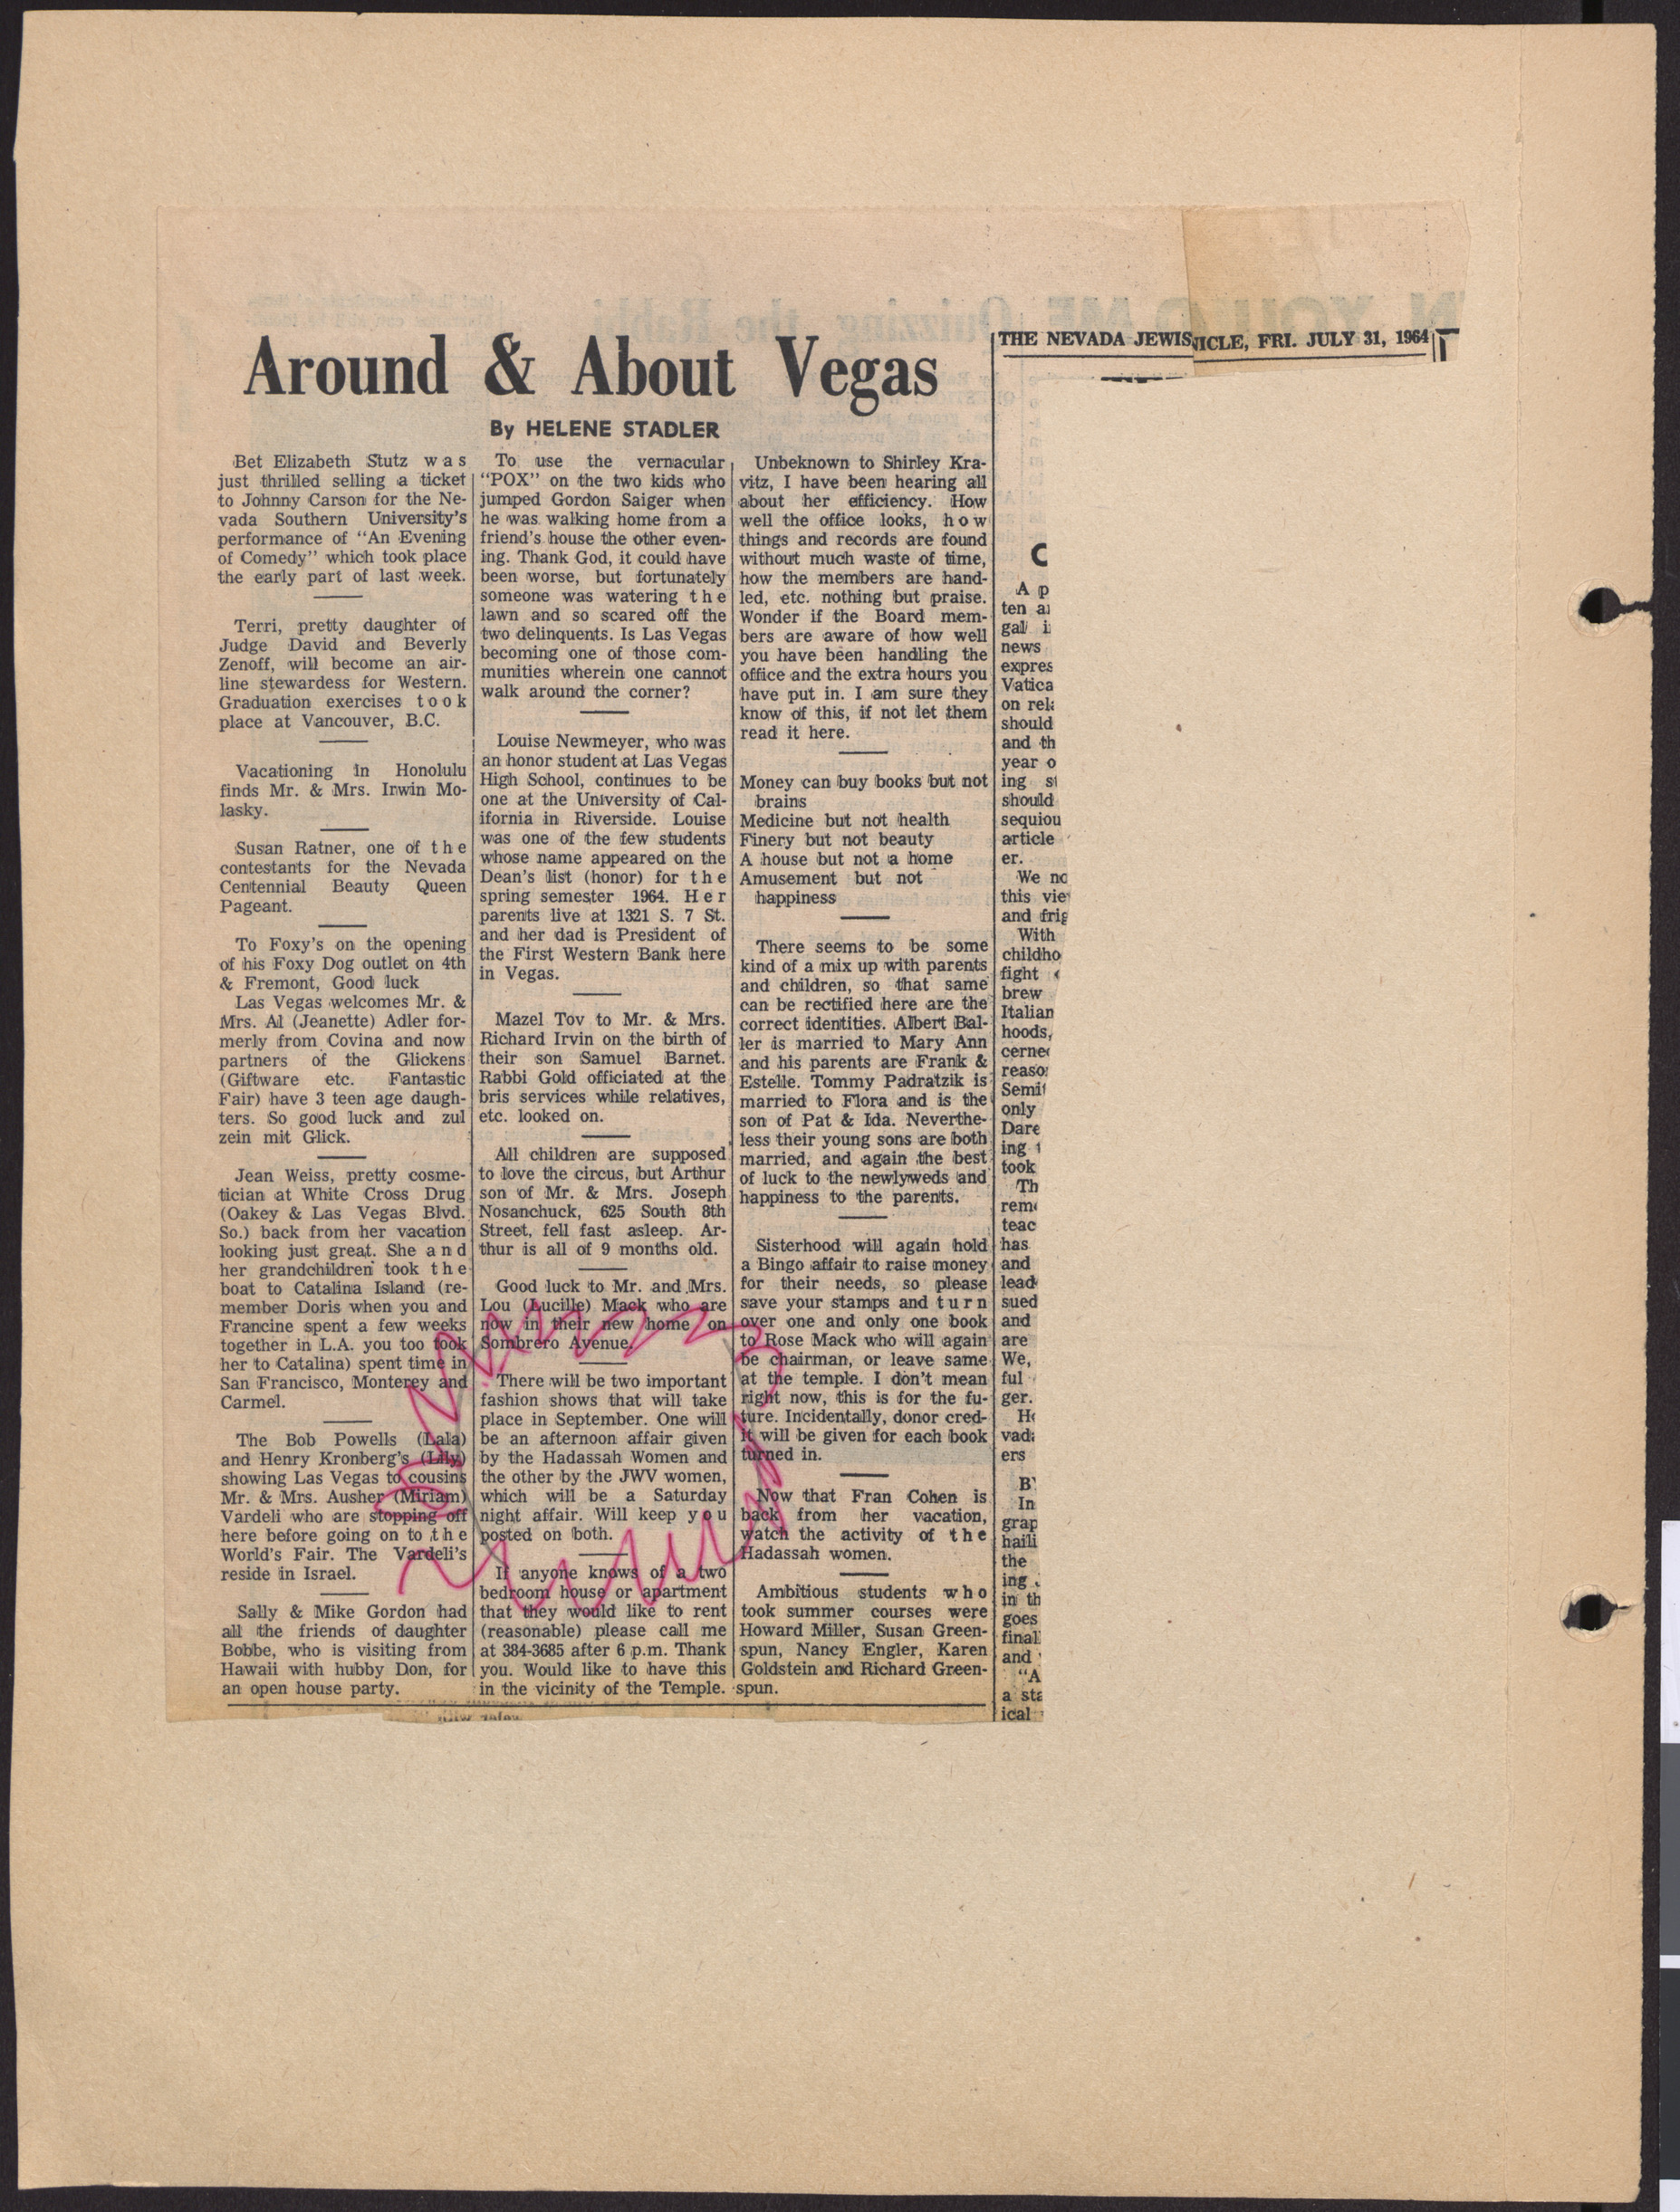 Newspaper clipping, Around & About Vegas, The Nevada Jewish Chronicle, July 31, 1964